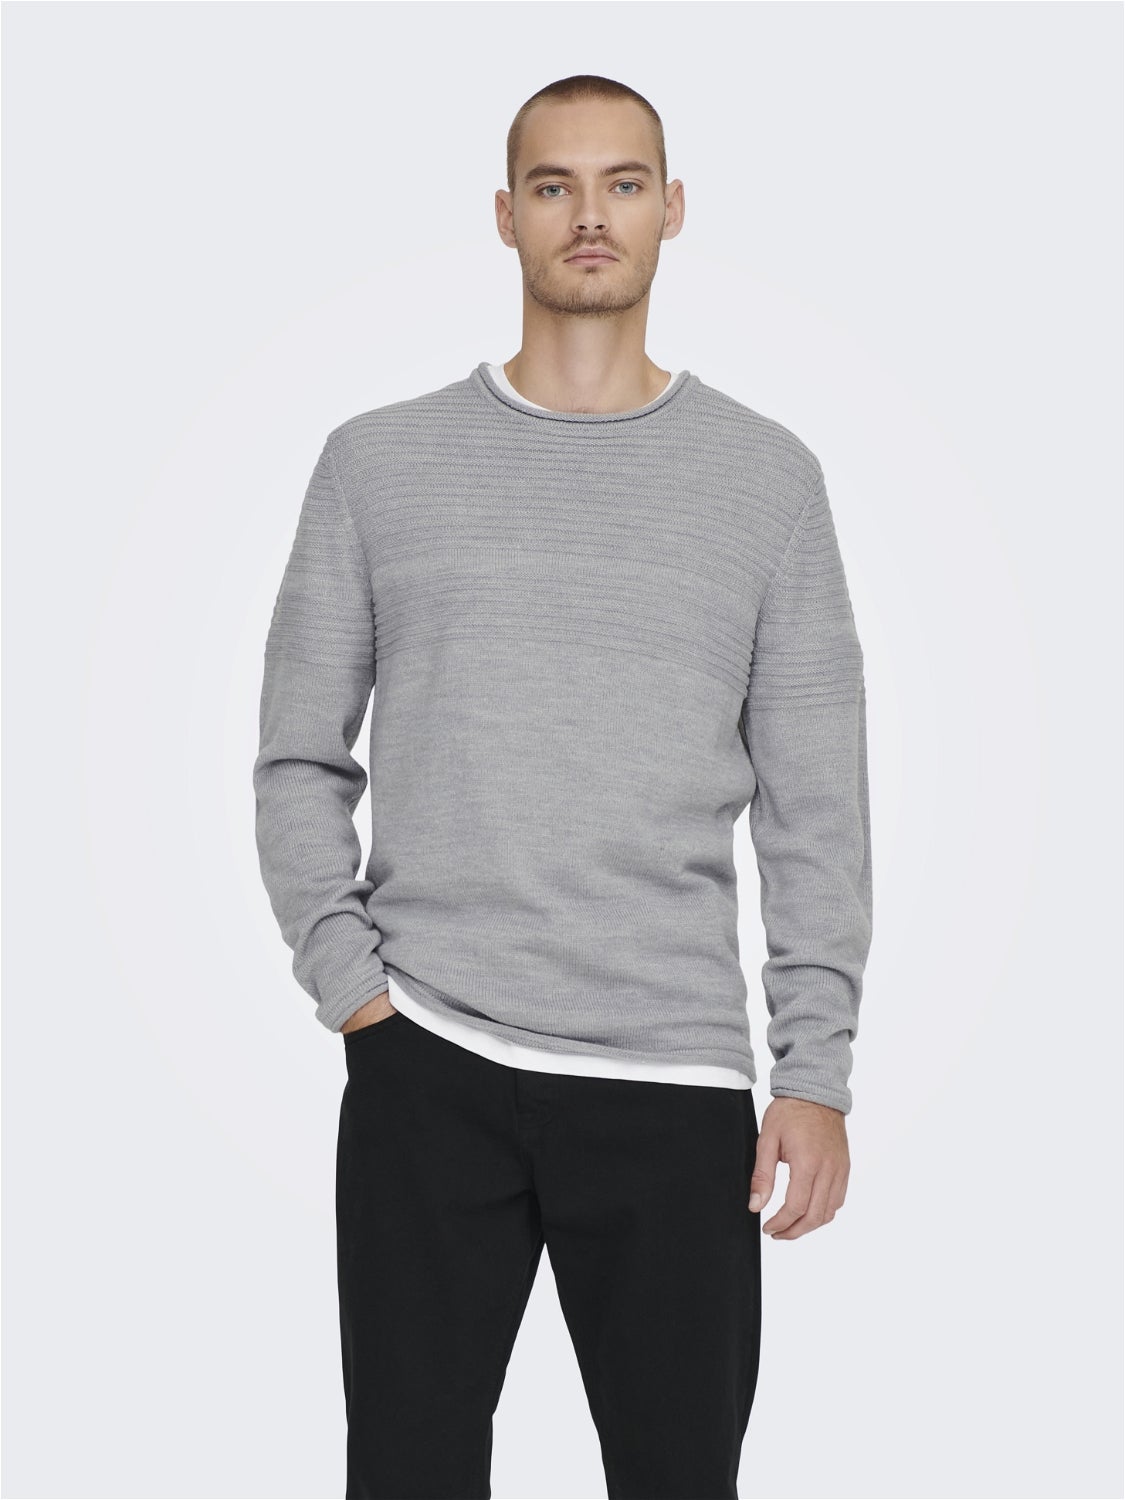 Agana Men Casual Round Neck Loose Fit Knitted Pullover Color Block Sweater